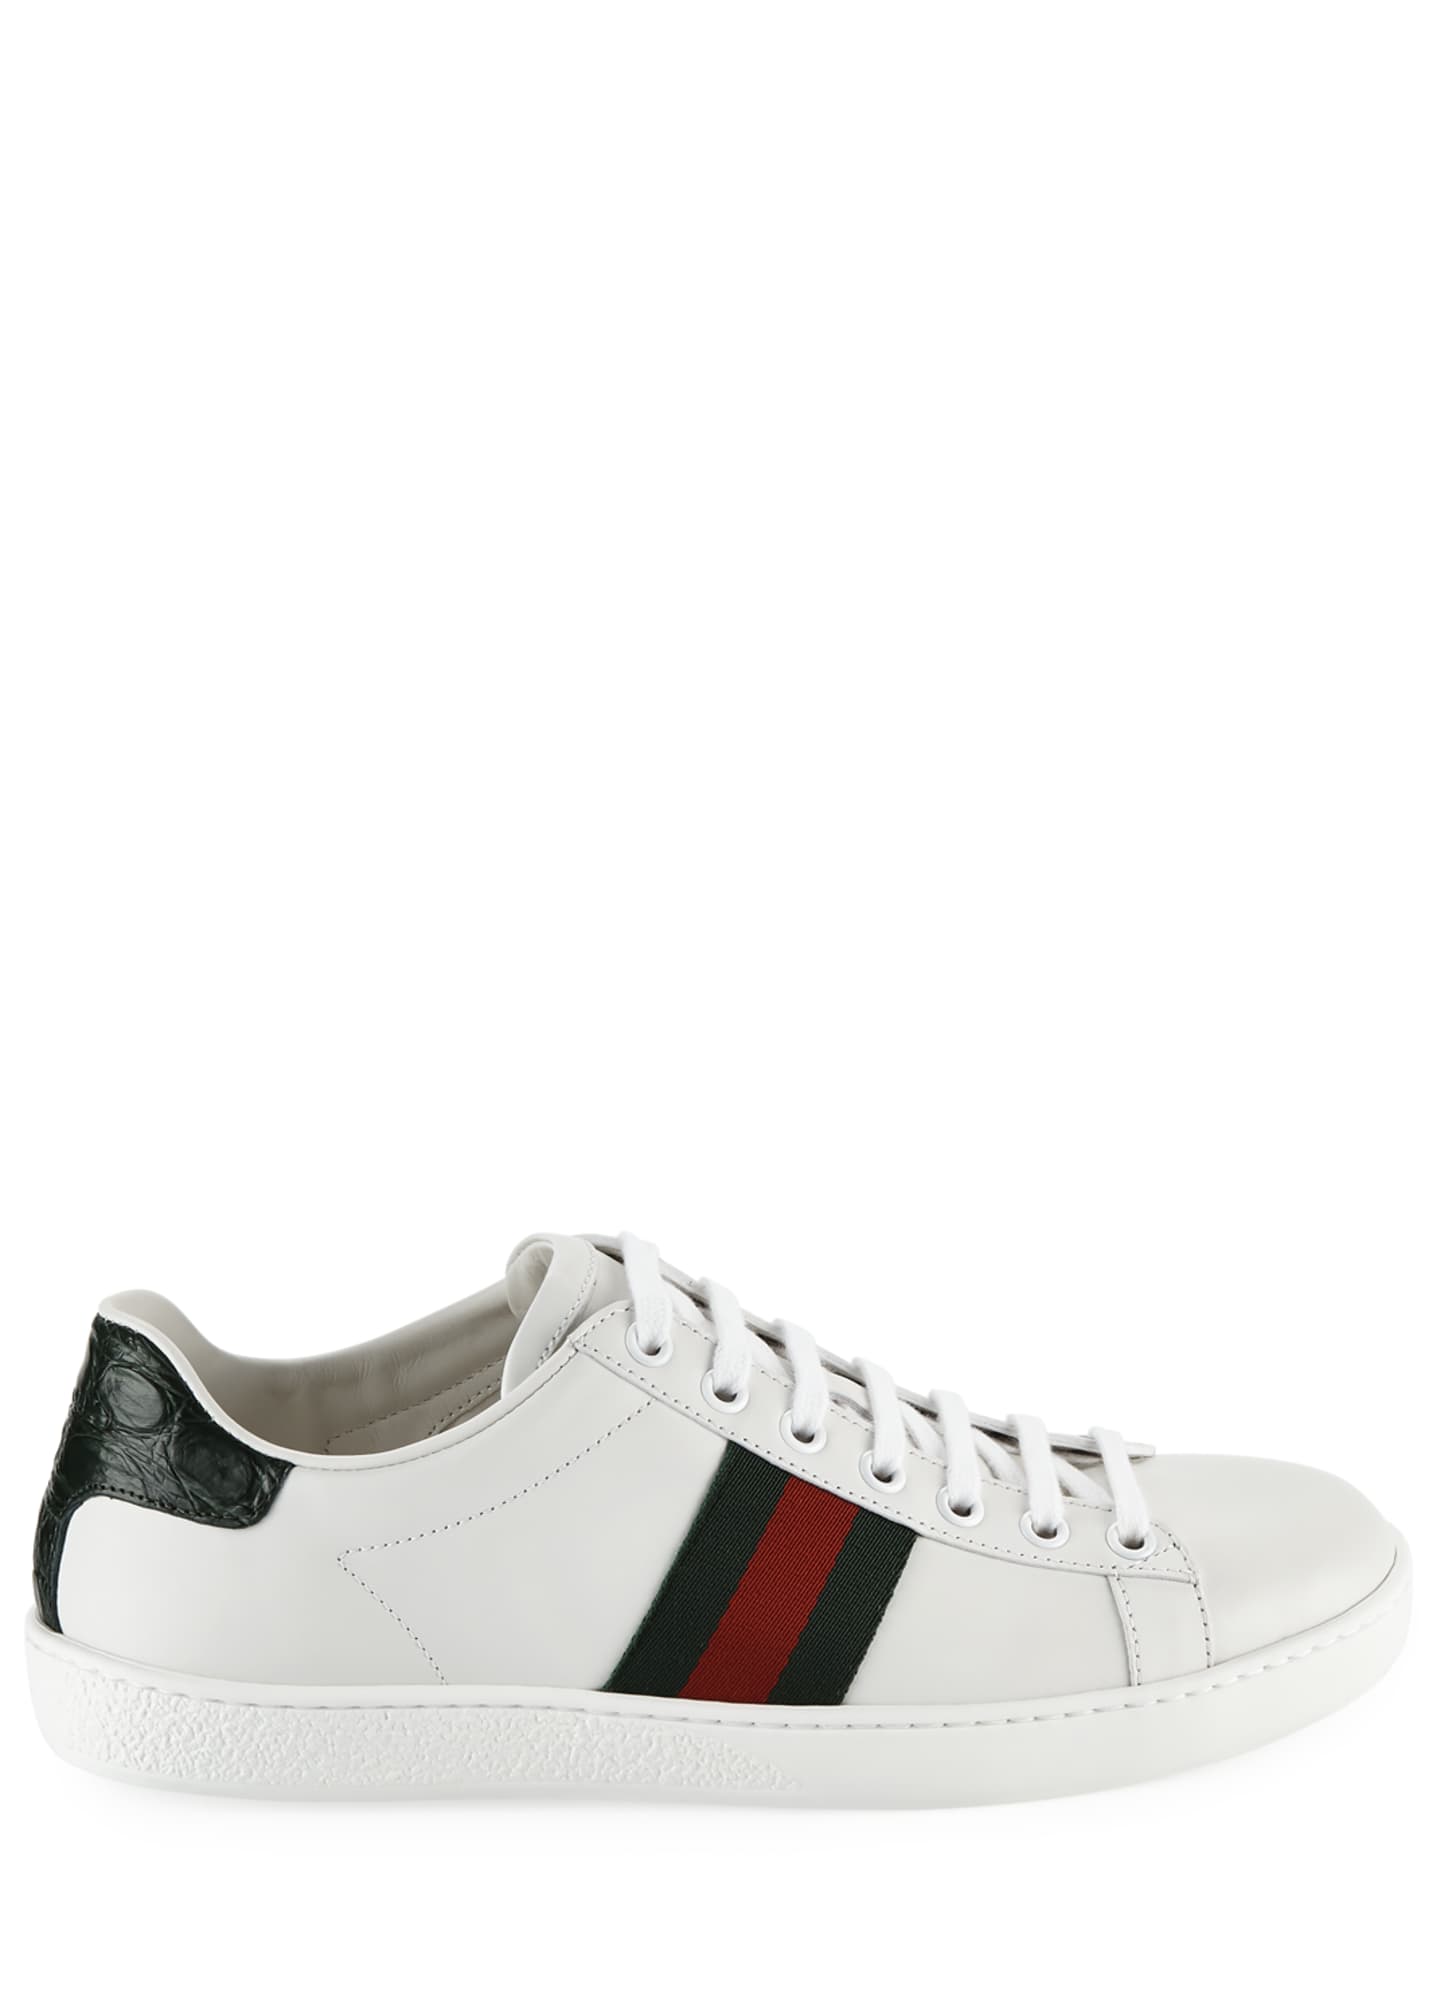 Gucci Ace Star & Bee Sneakers Image 2 of 5